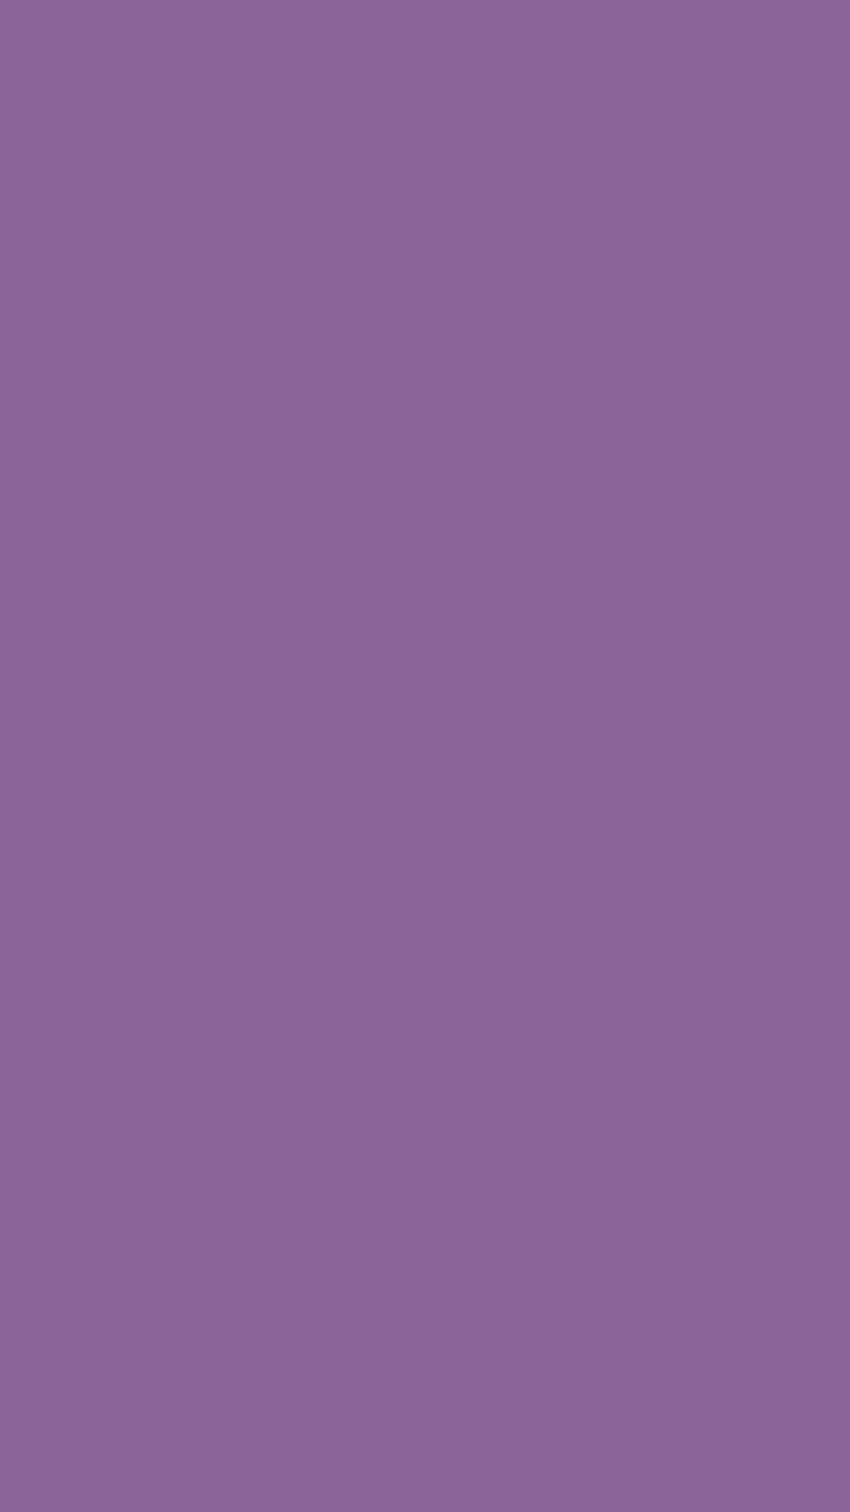 Medium grayish purple for iPhone (solid color). Use this HD phone wallpaper